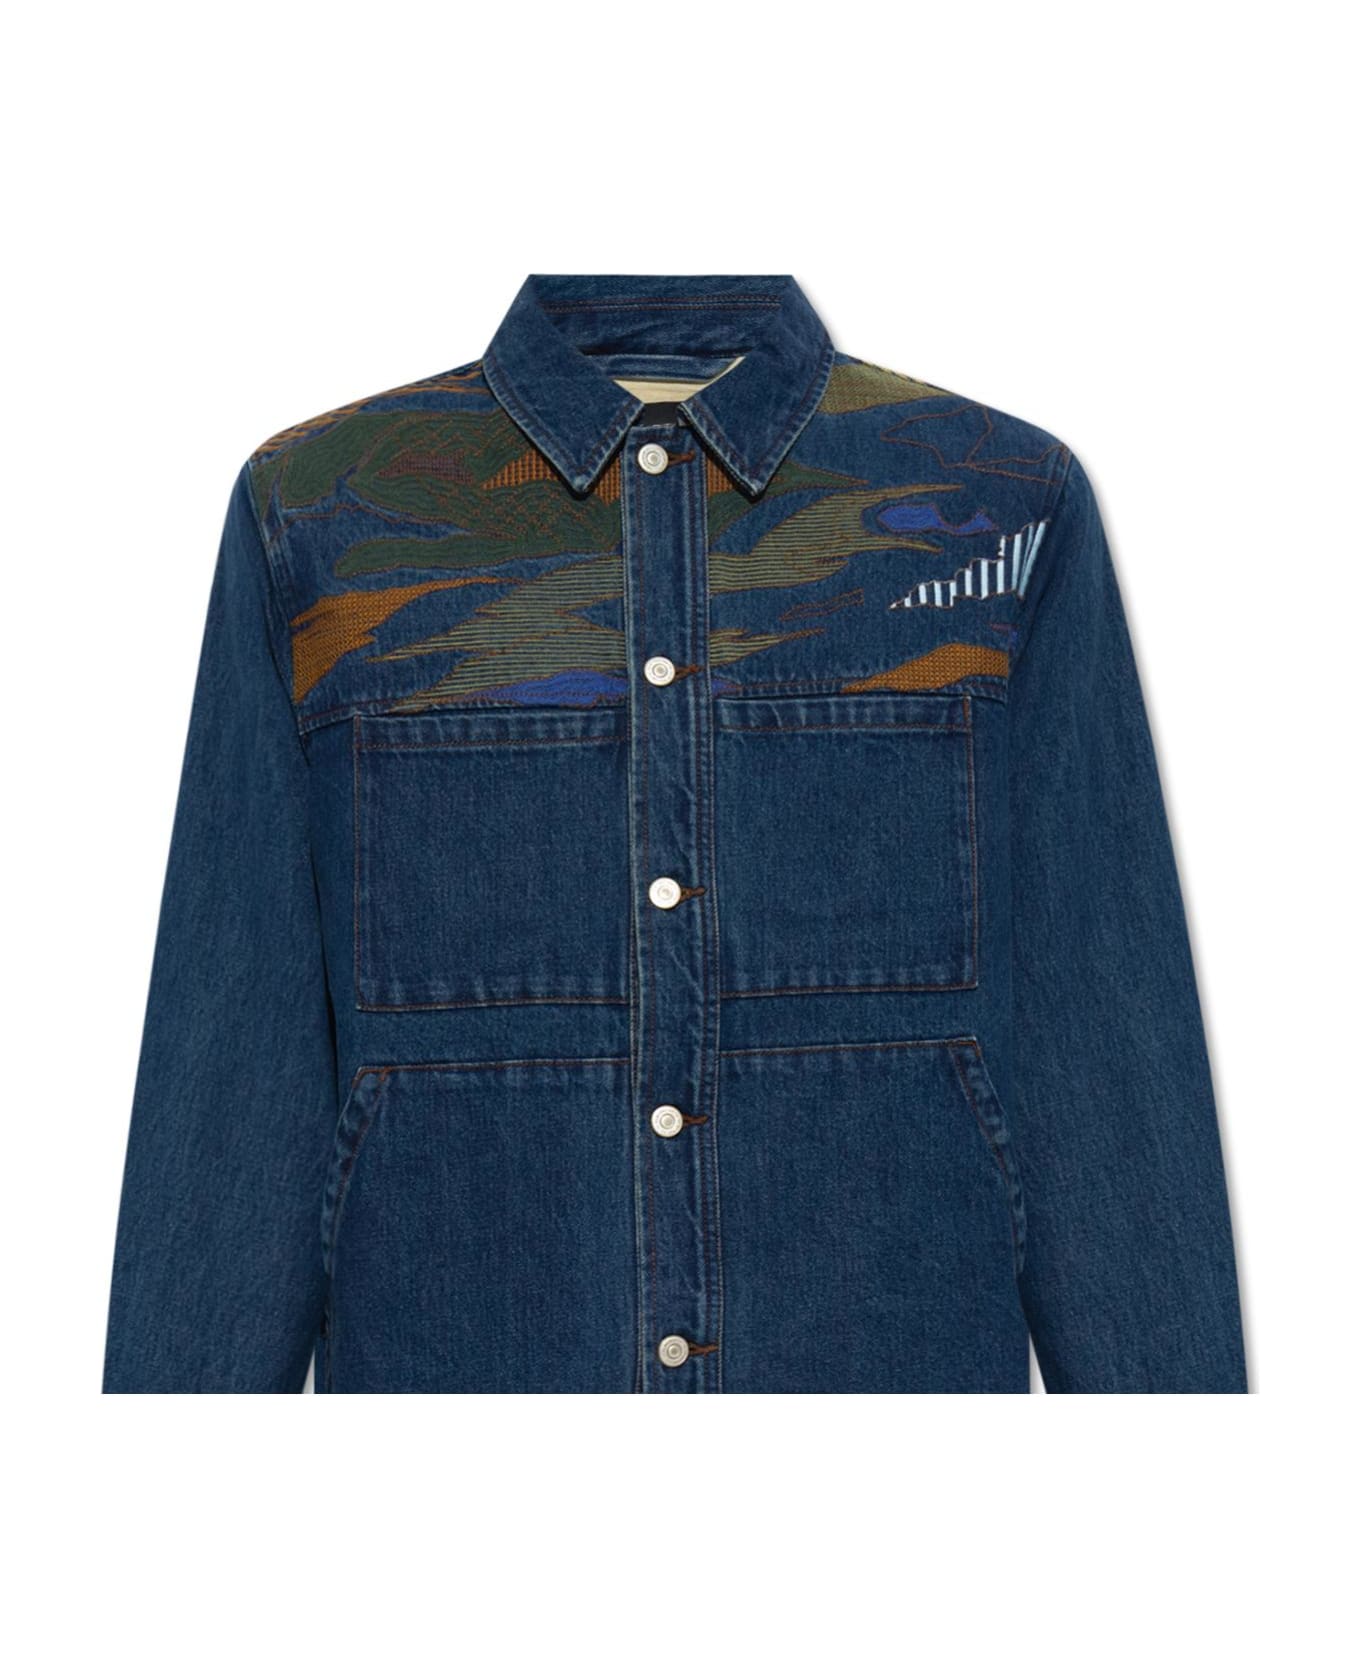 PS by Paul Smith Ps Paul Smith Embroidered Denim Jacket - Blue ジャケット